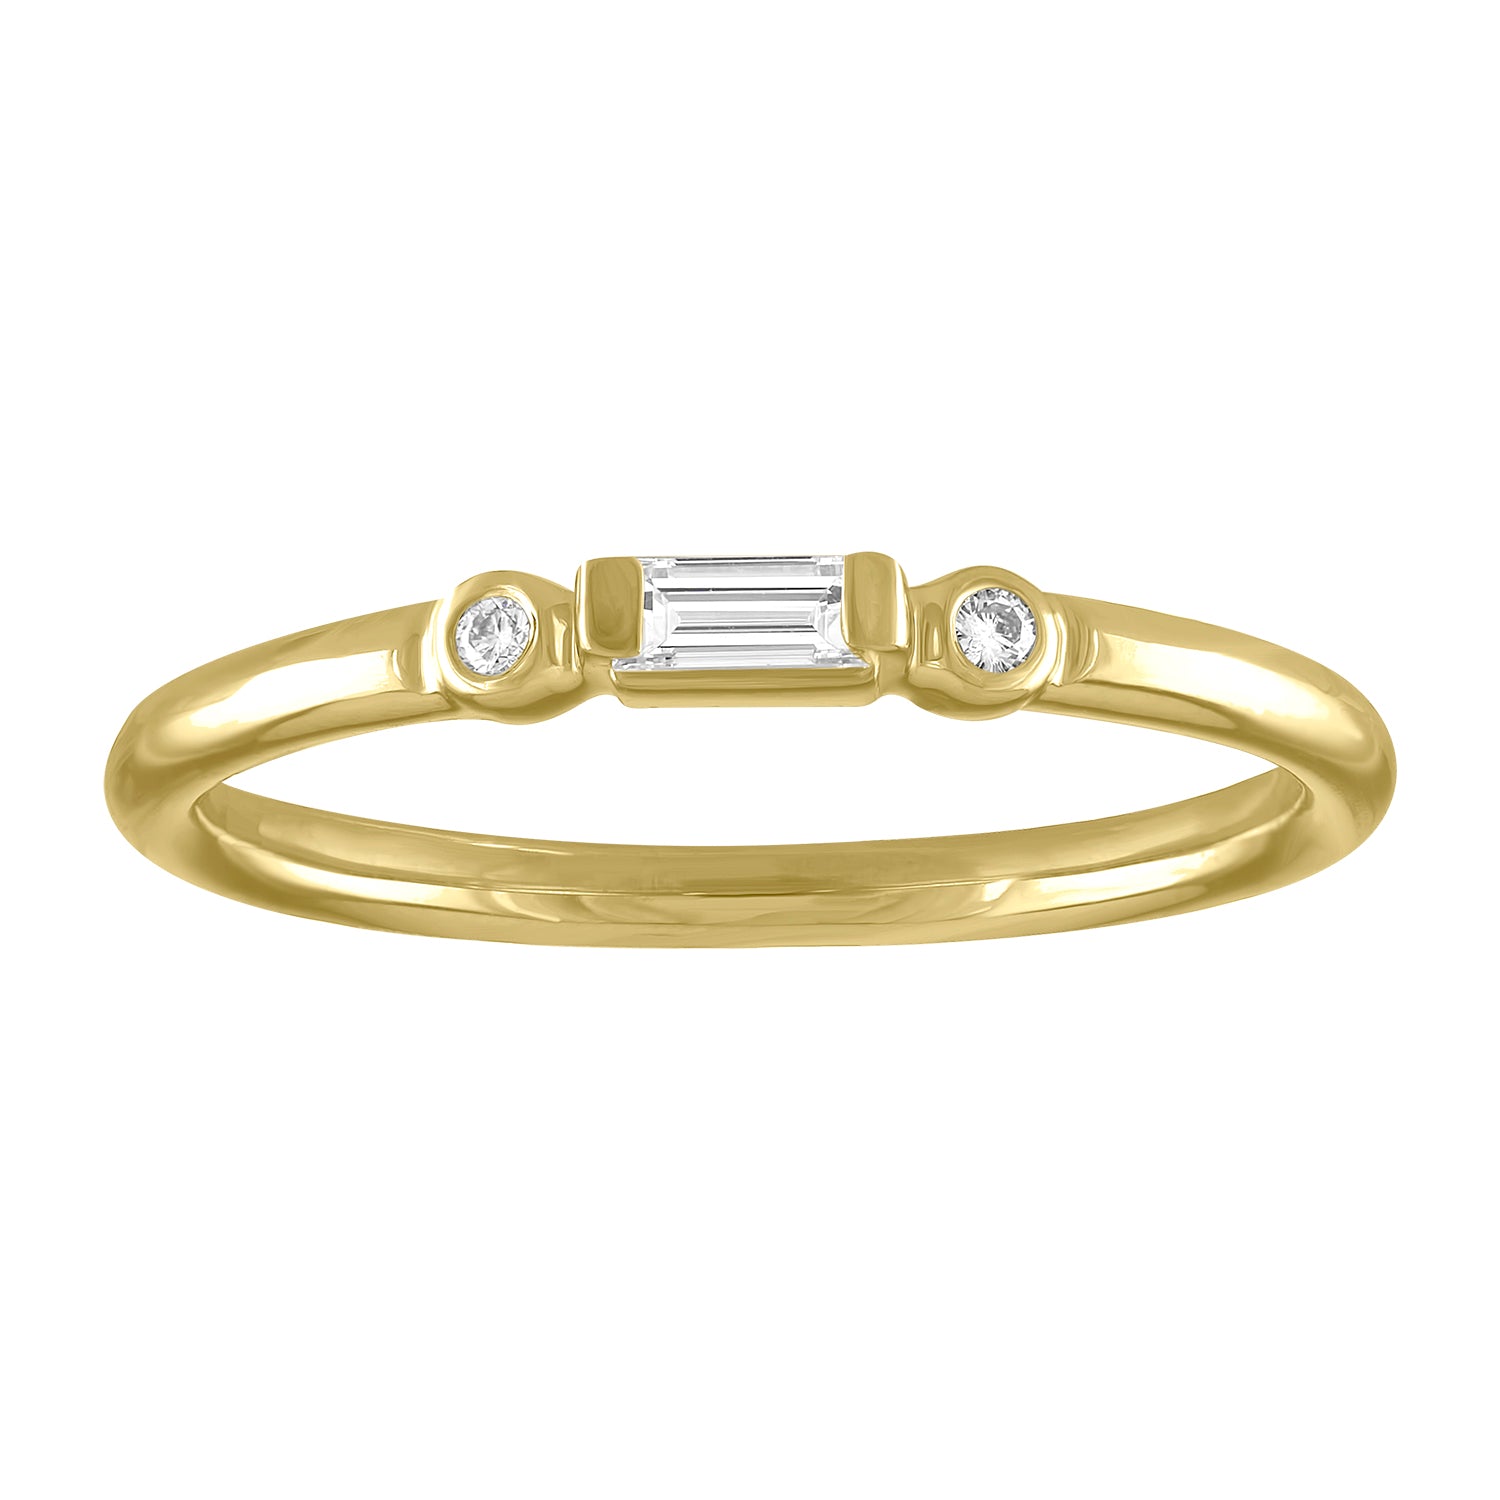 Yellow gold skinny band with a diamond baguette in the center and two round diamonds on the side. 